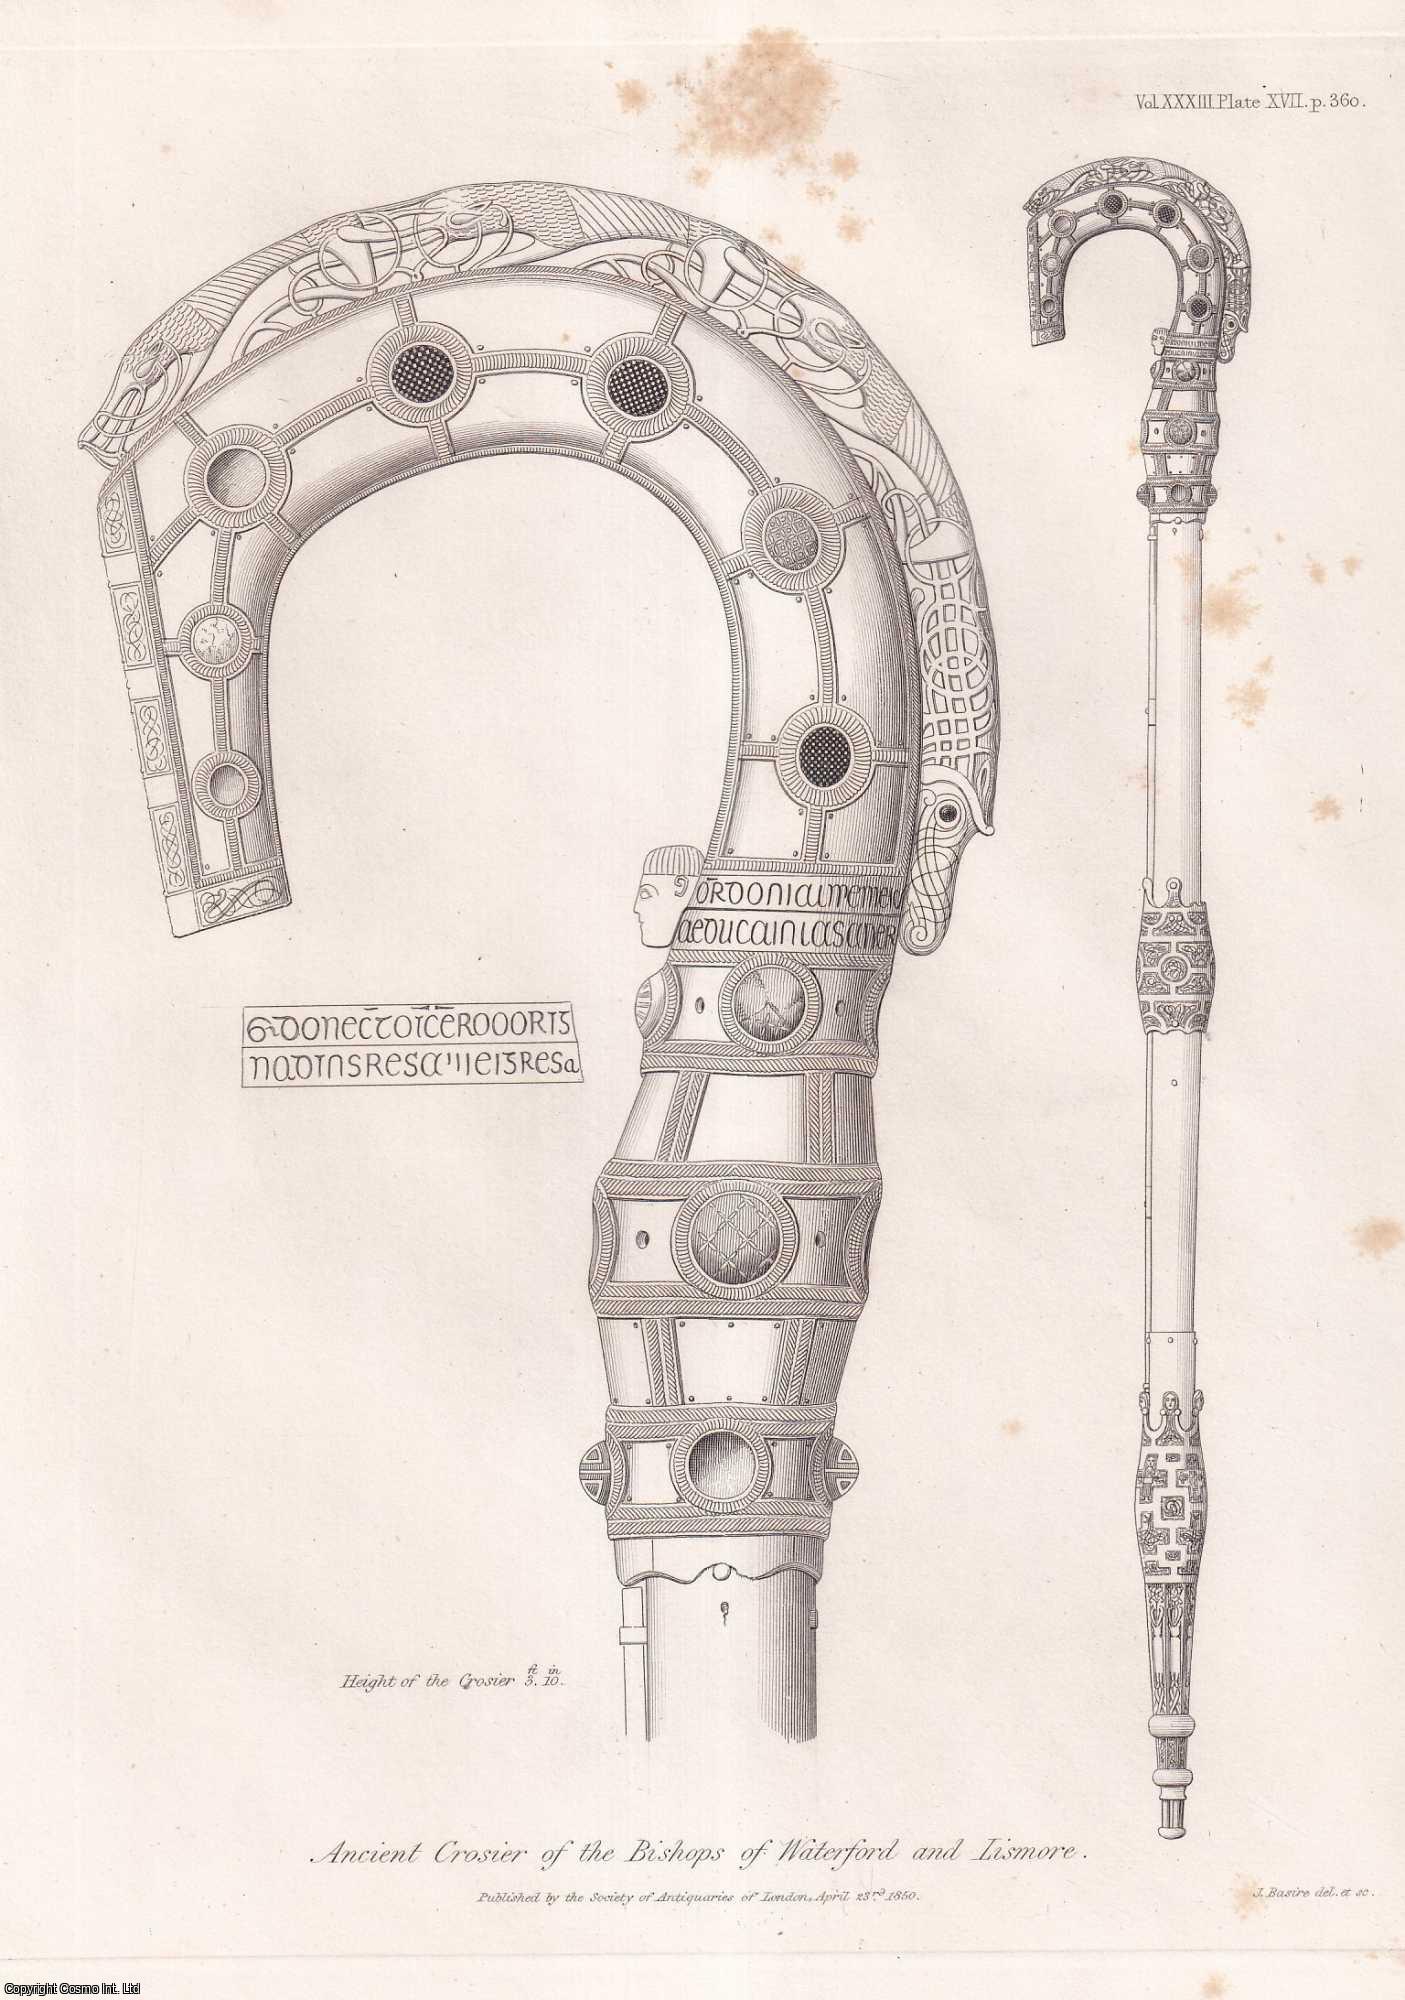 J. Payne Collier - Note on the ancient Crosier of the Bishops of Waterford and Lismore, the property of the Duke of Devonshire. An uncommon original article from the journal Archaeologia, 1849.